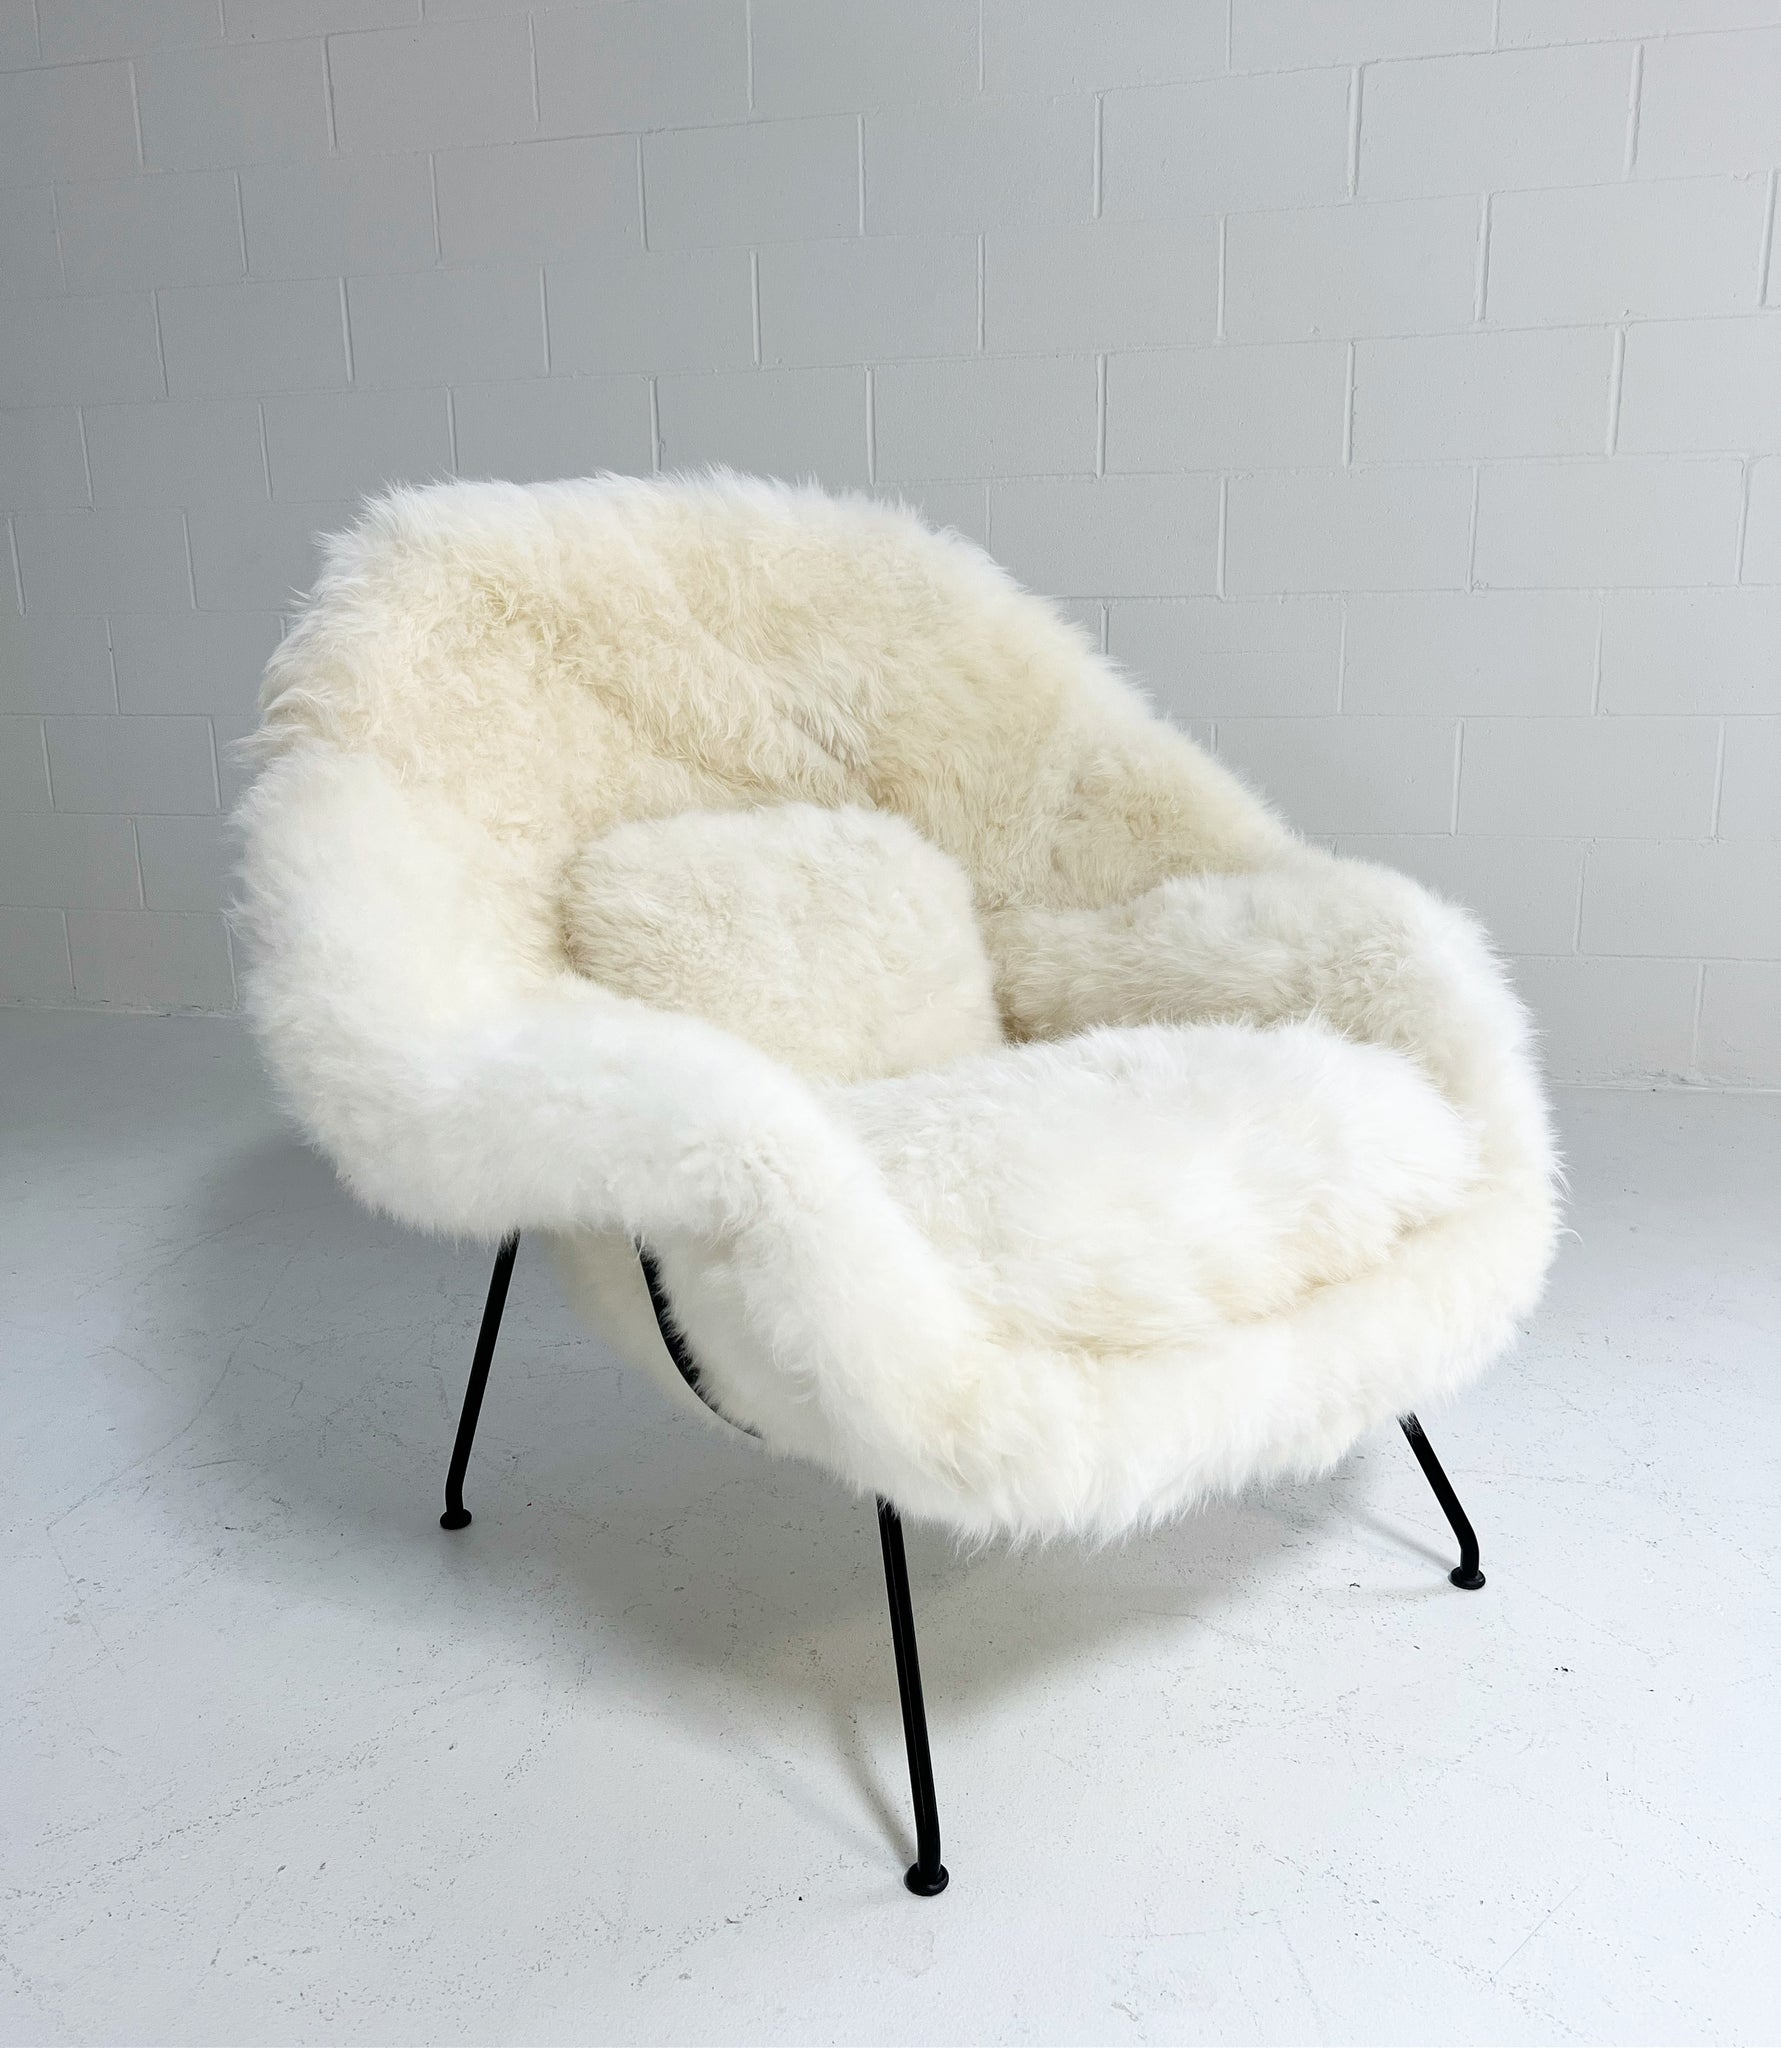 Bespoke Womb Chair and Ottoman in Natural Cashmere